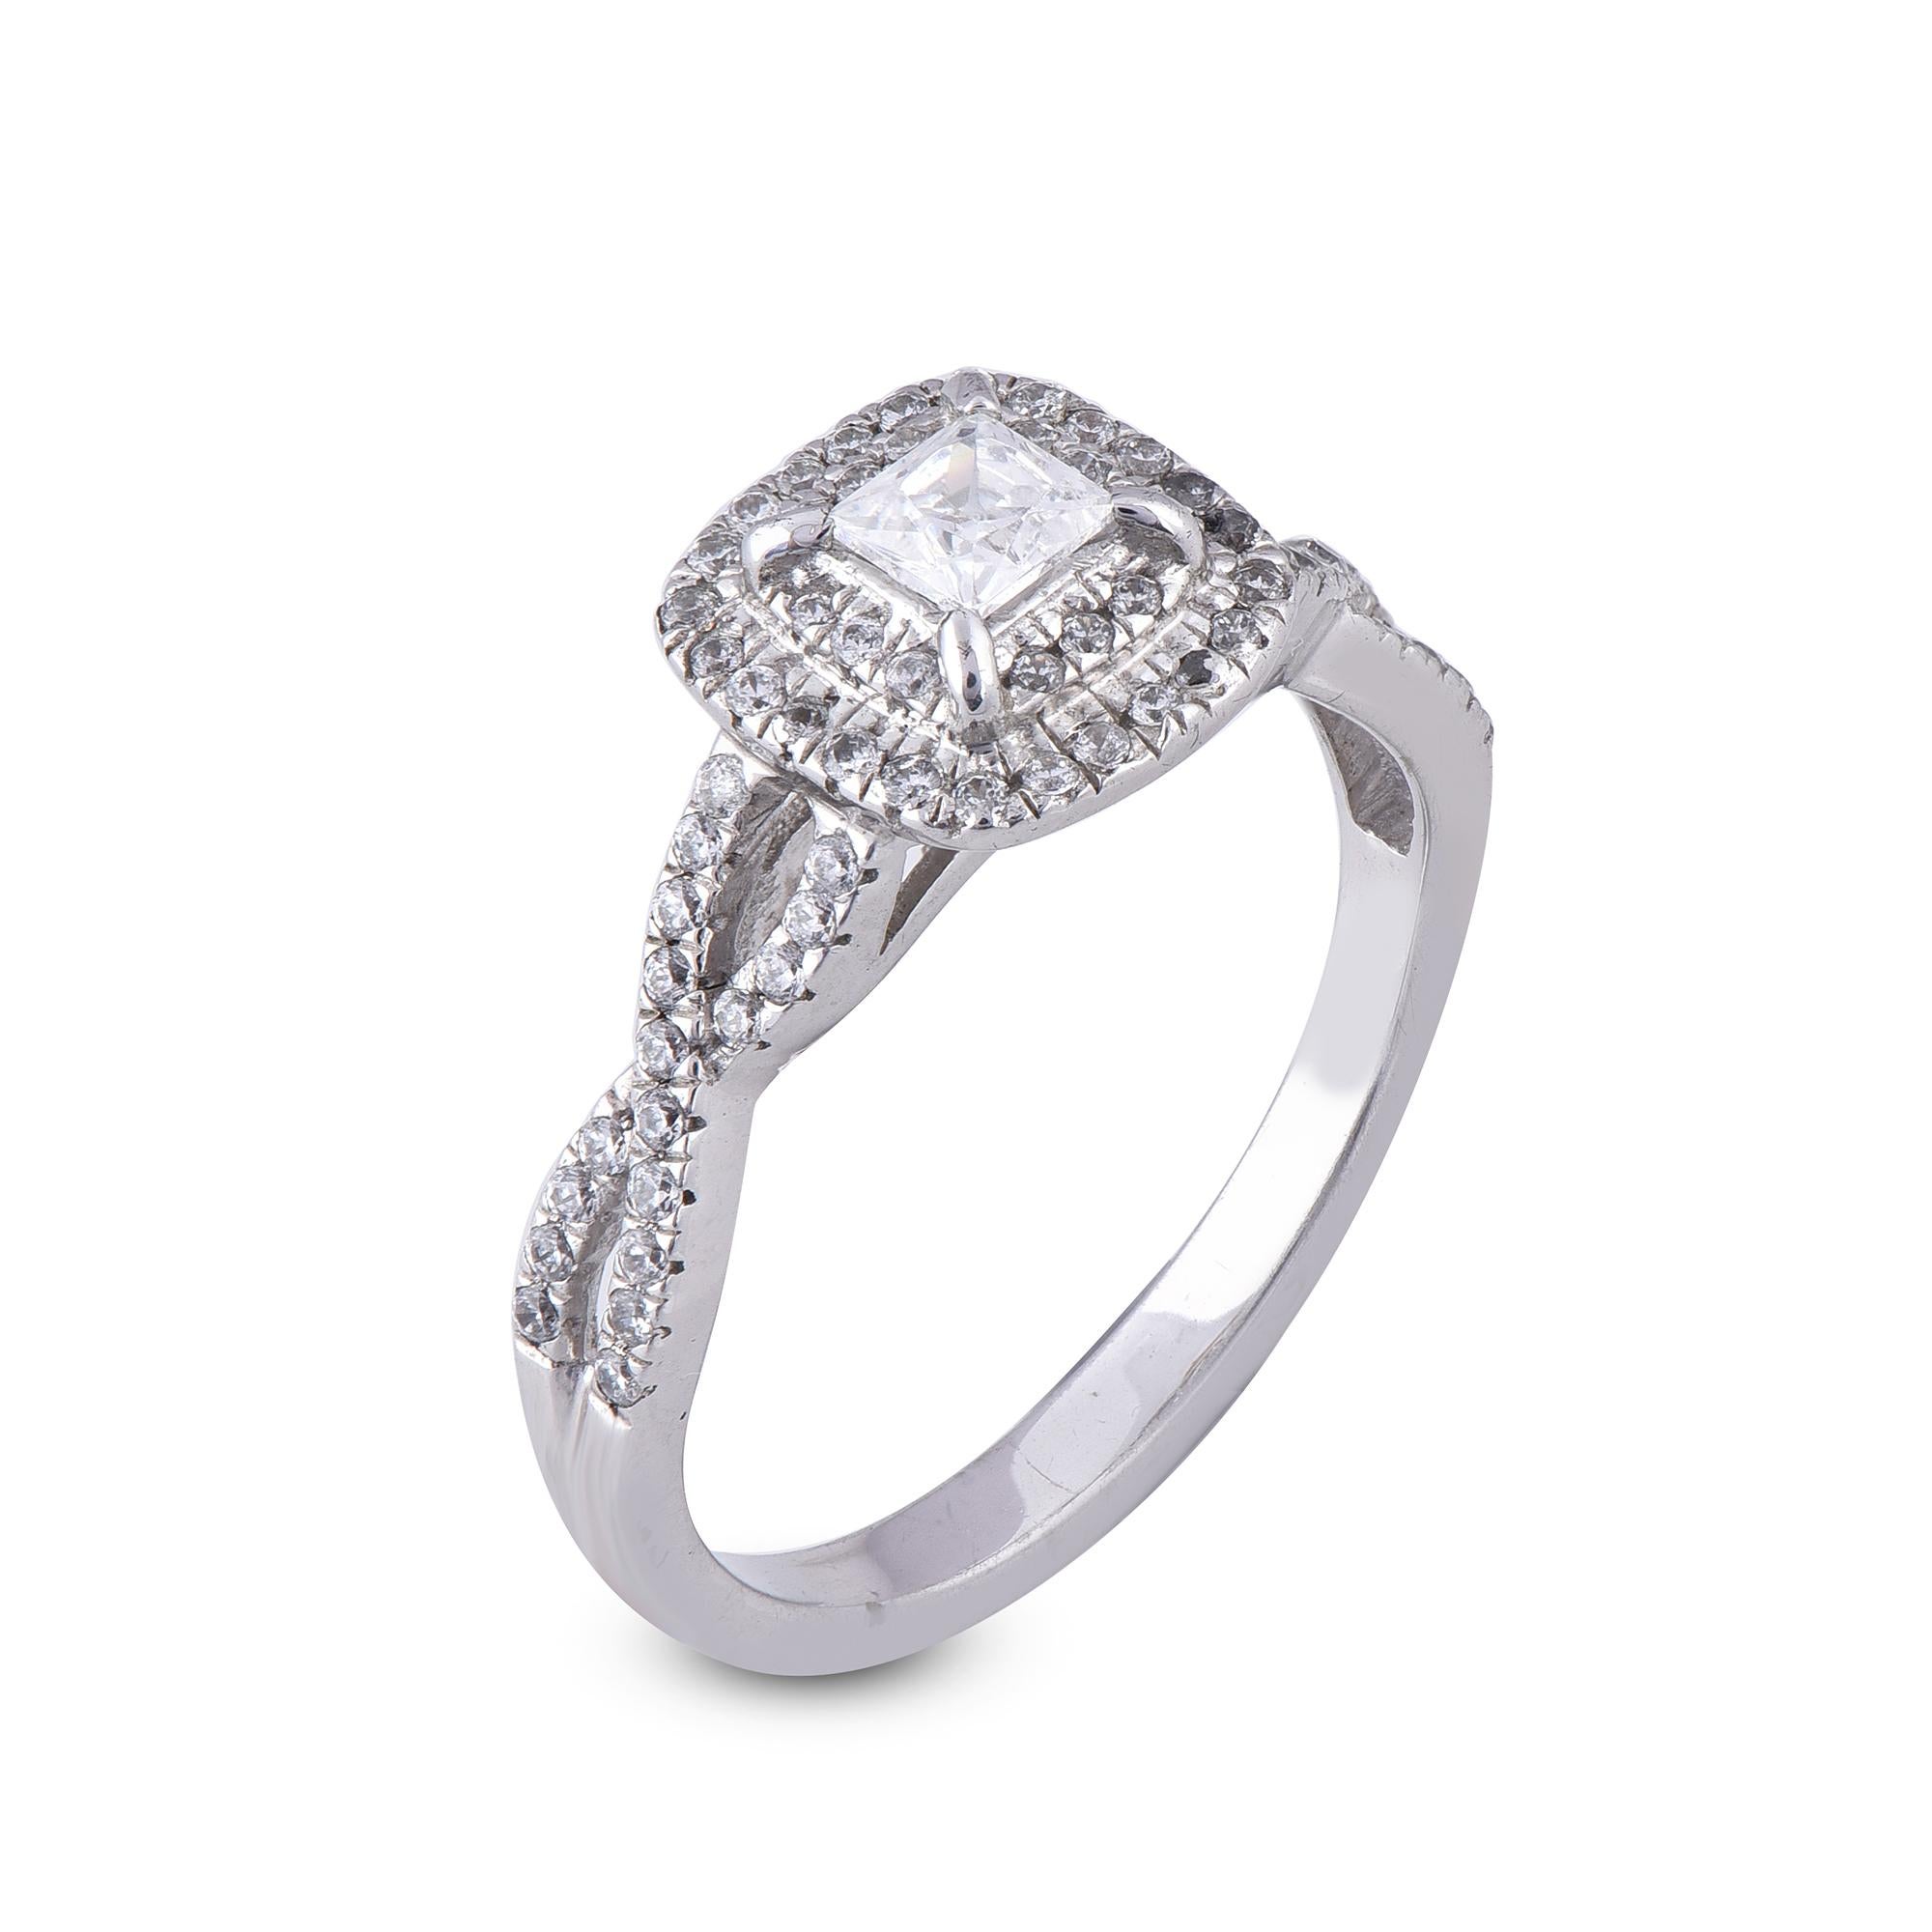 Designed with romance in mind, this diamond twisted shank ring increases the sparkle factor. The ring is crafted from 18 karat gold in your choice of white, rose, or yellow, and features Round 72  roung and 1 princess cut diamond in Prong setting